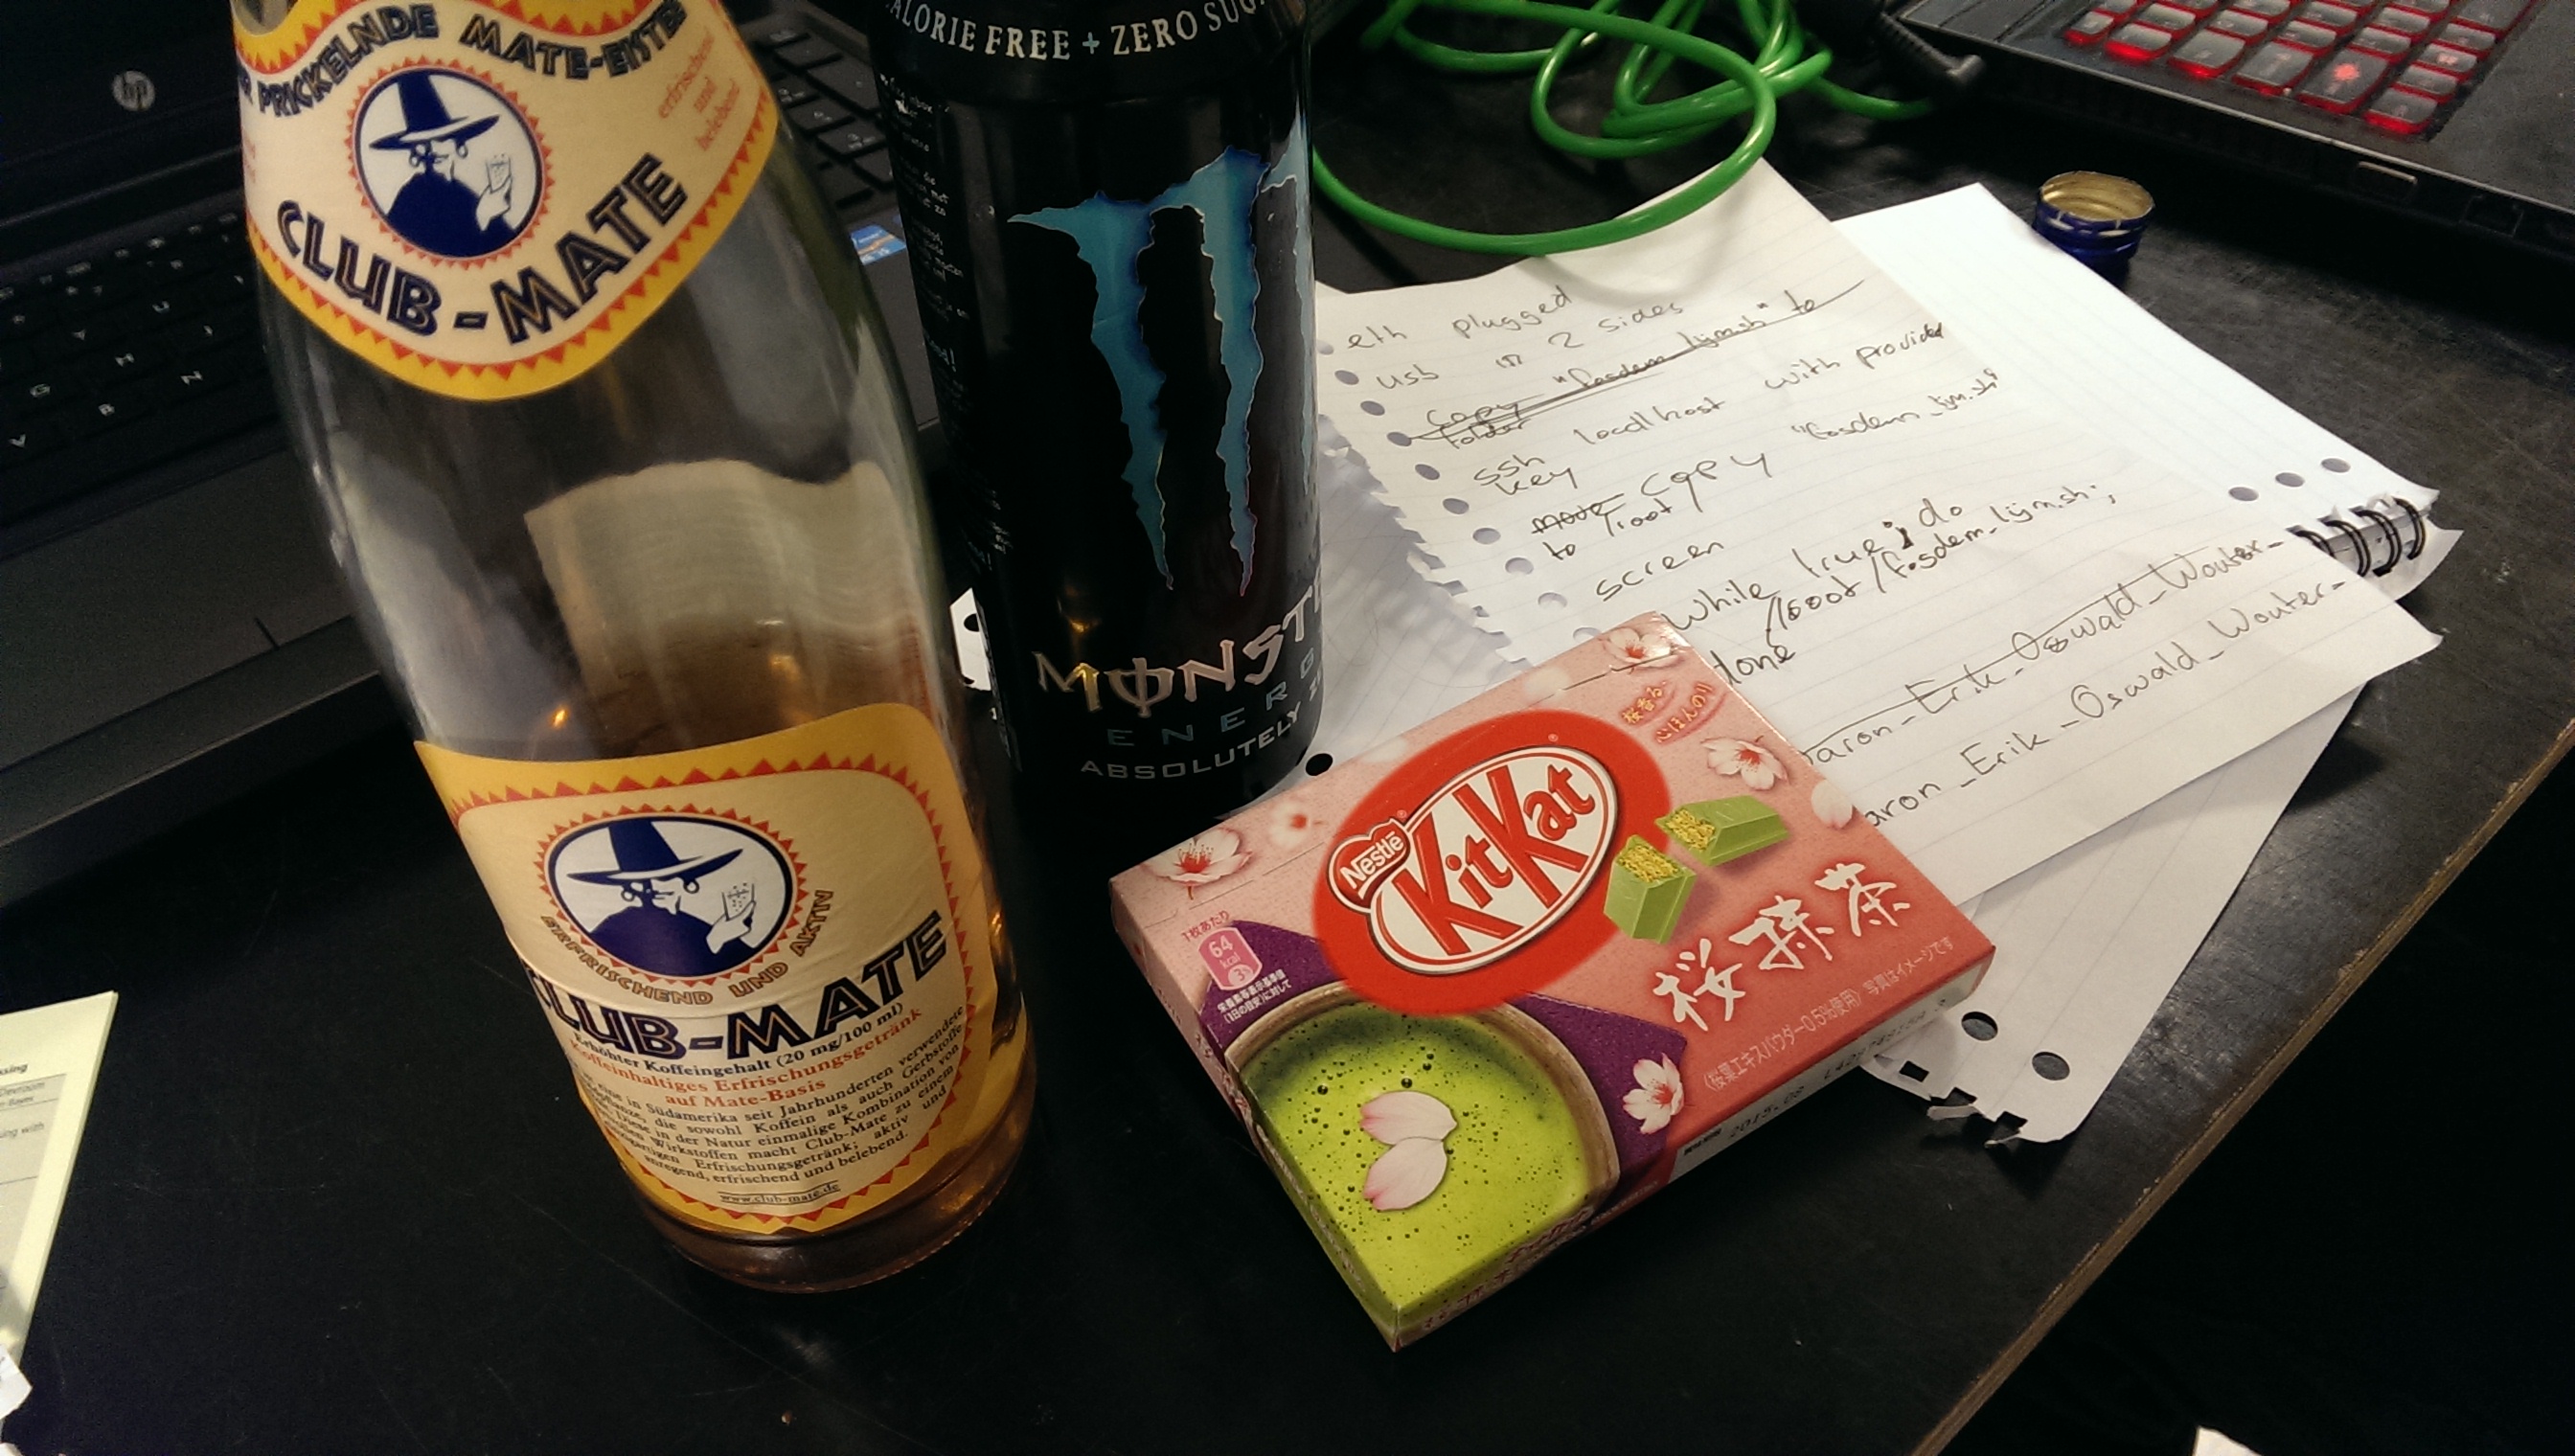 The necessary drinks and snacks for coding.